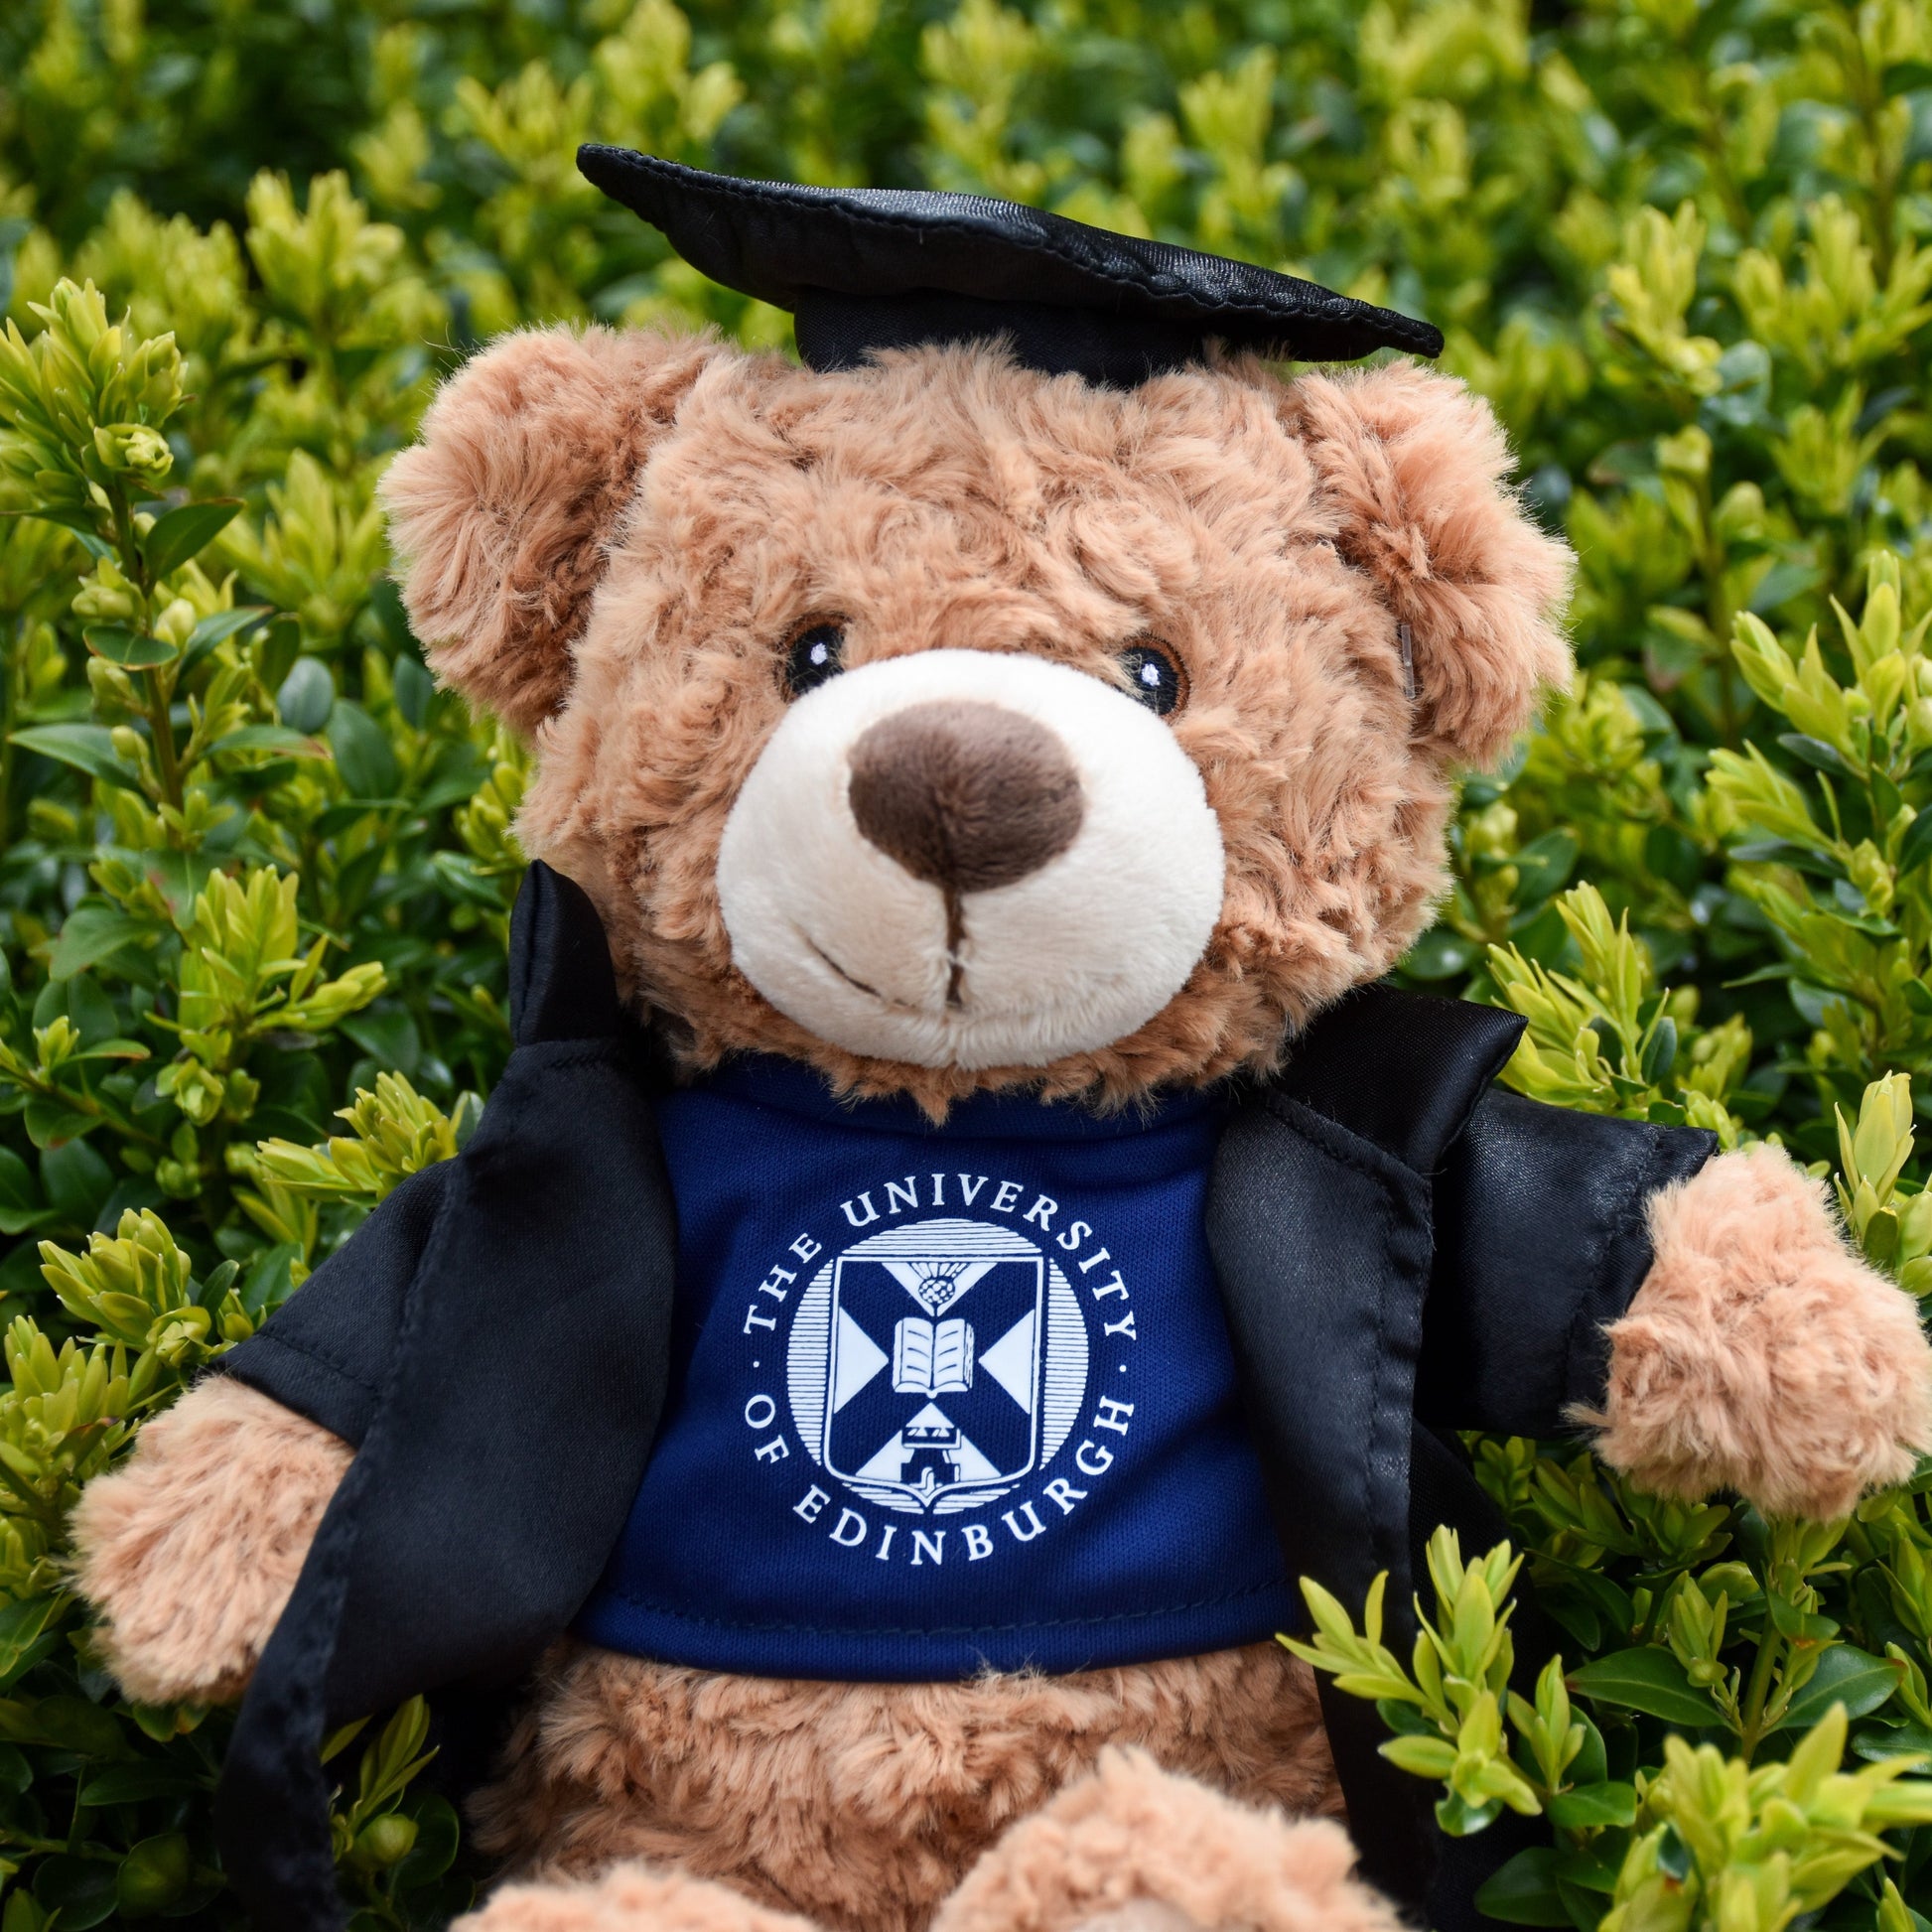 A close up of Edinbear Recycled Plush's face in front of a green bush.